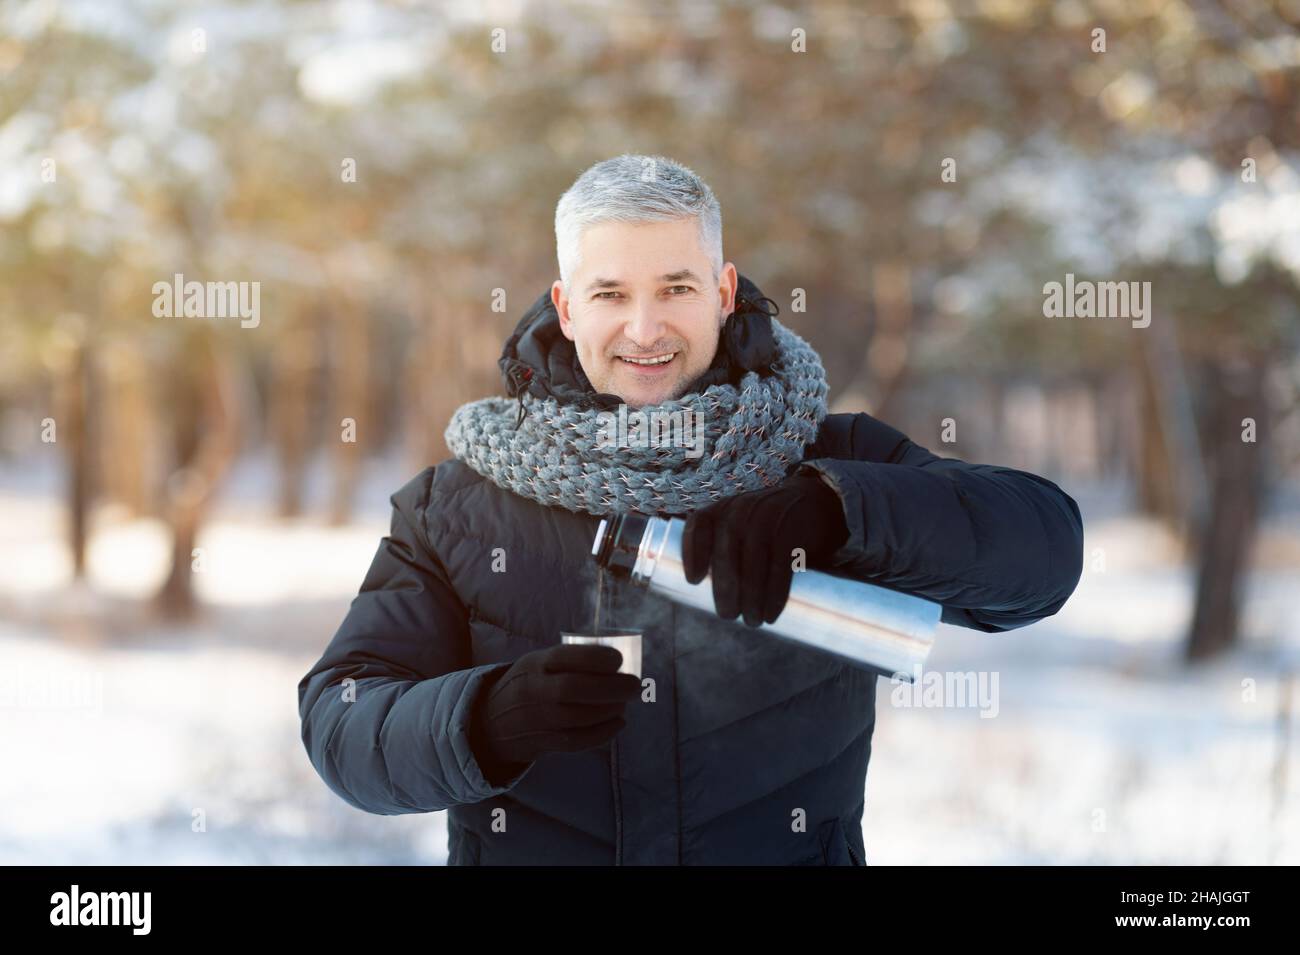 Close-up of Man Holding Thermos and an Iron Mug, Pouring Hot Tea Outdoors.  Selective Focus on Thermo Flask Stock Photo - Image of beverage, iron:  231468226